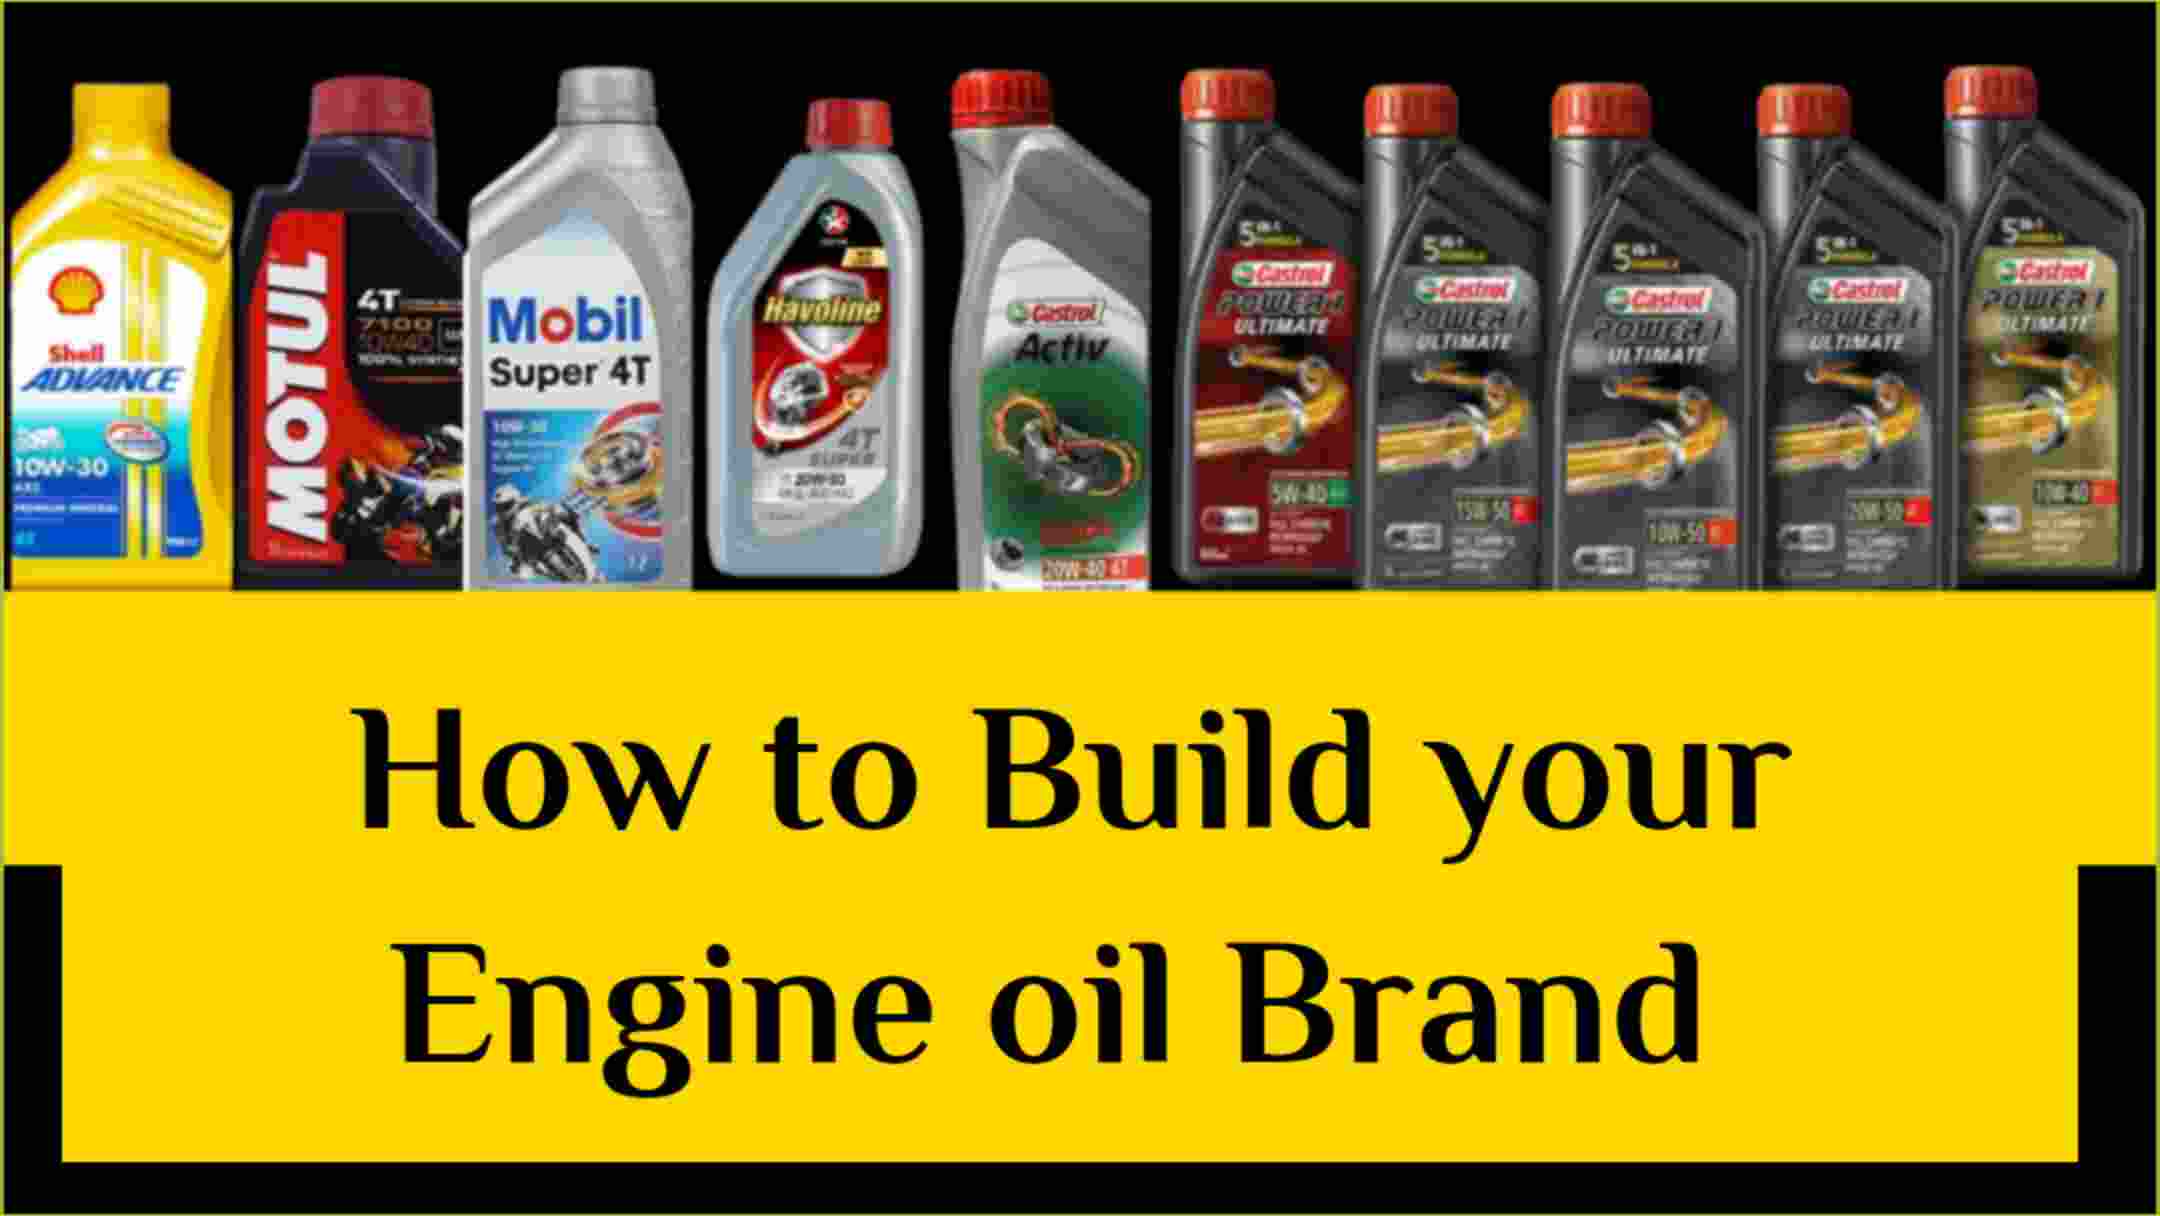 How to Build Your Engine Oil Brand & earn 10 lakh rupees every month/